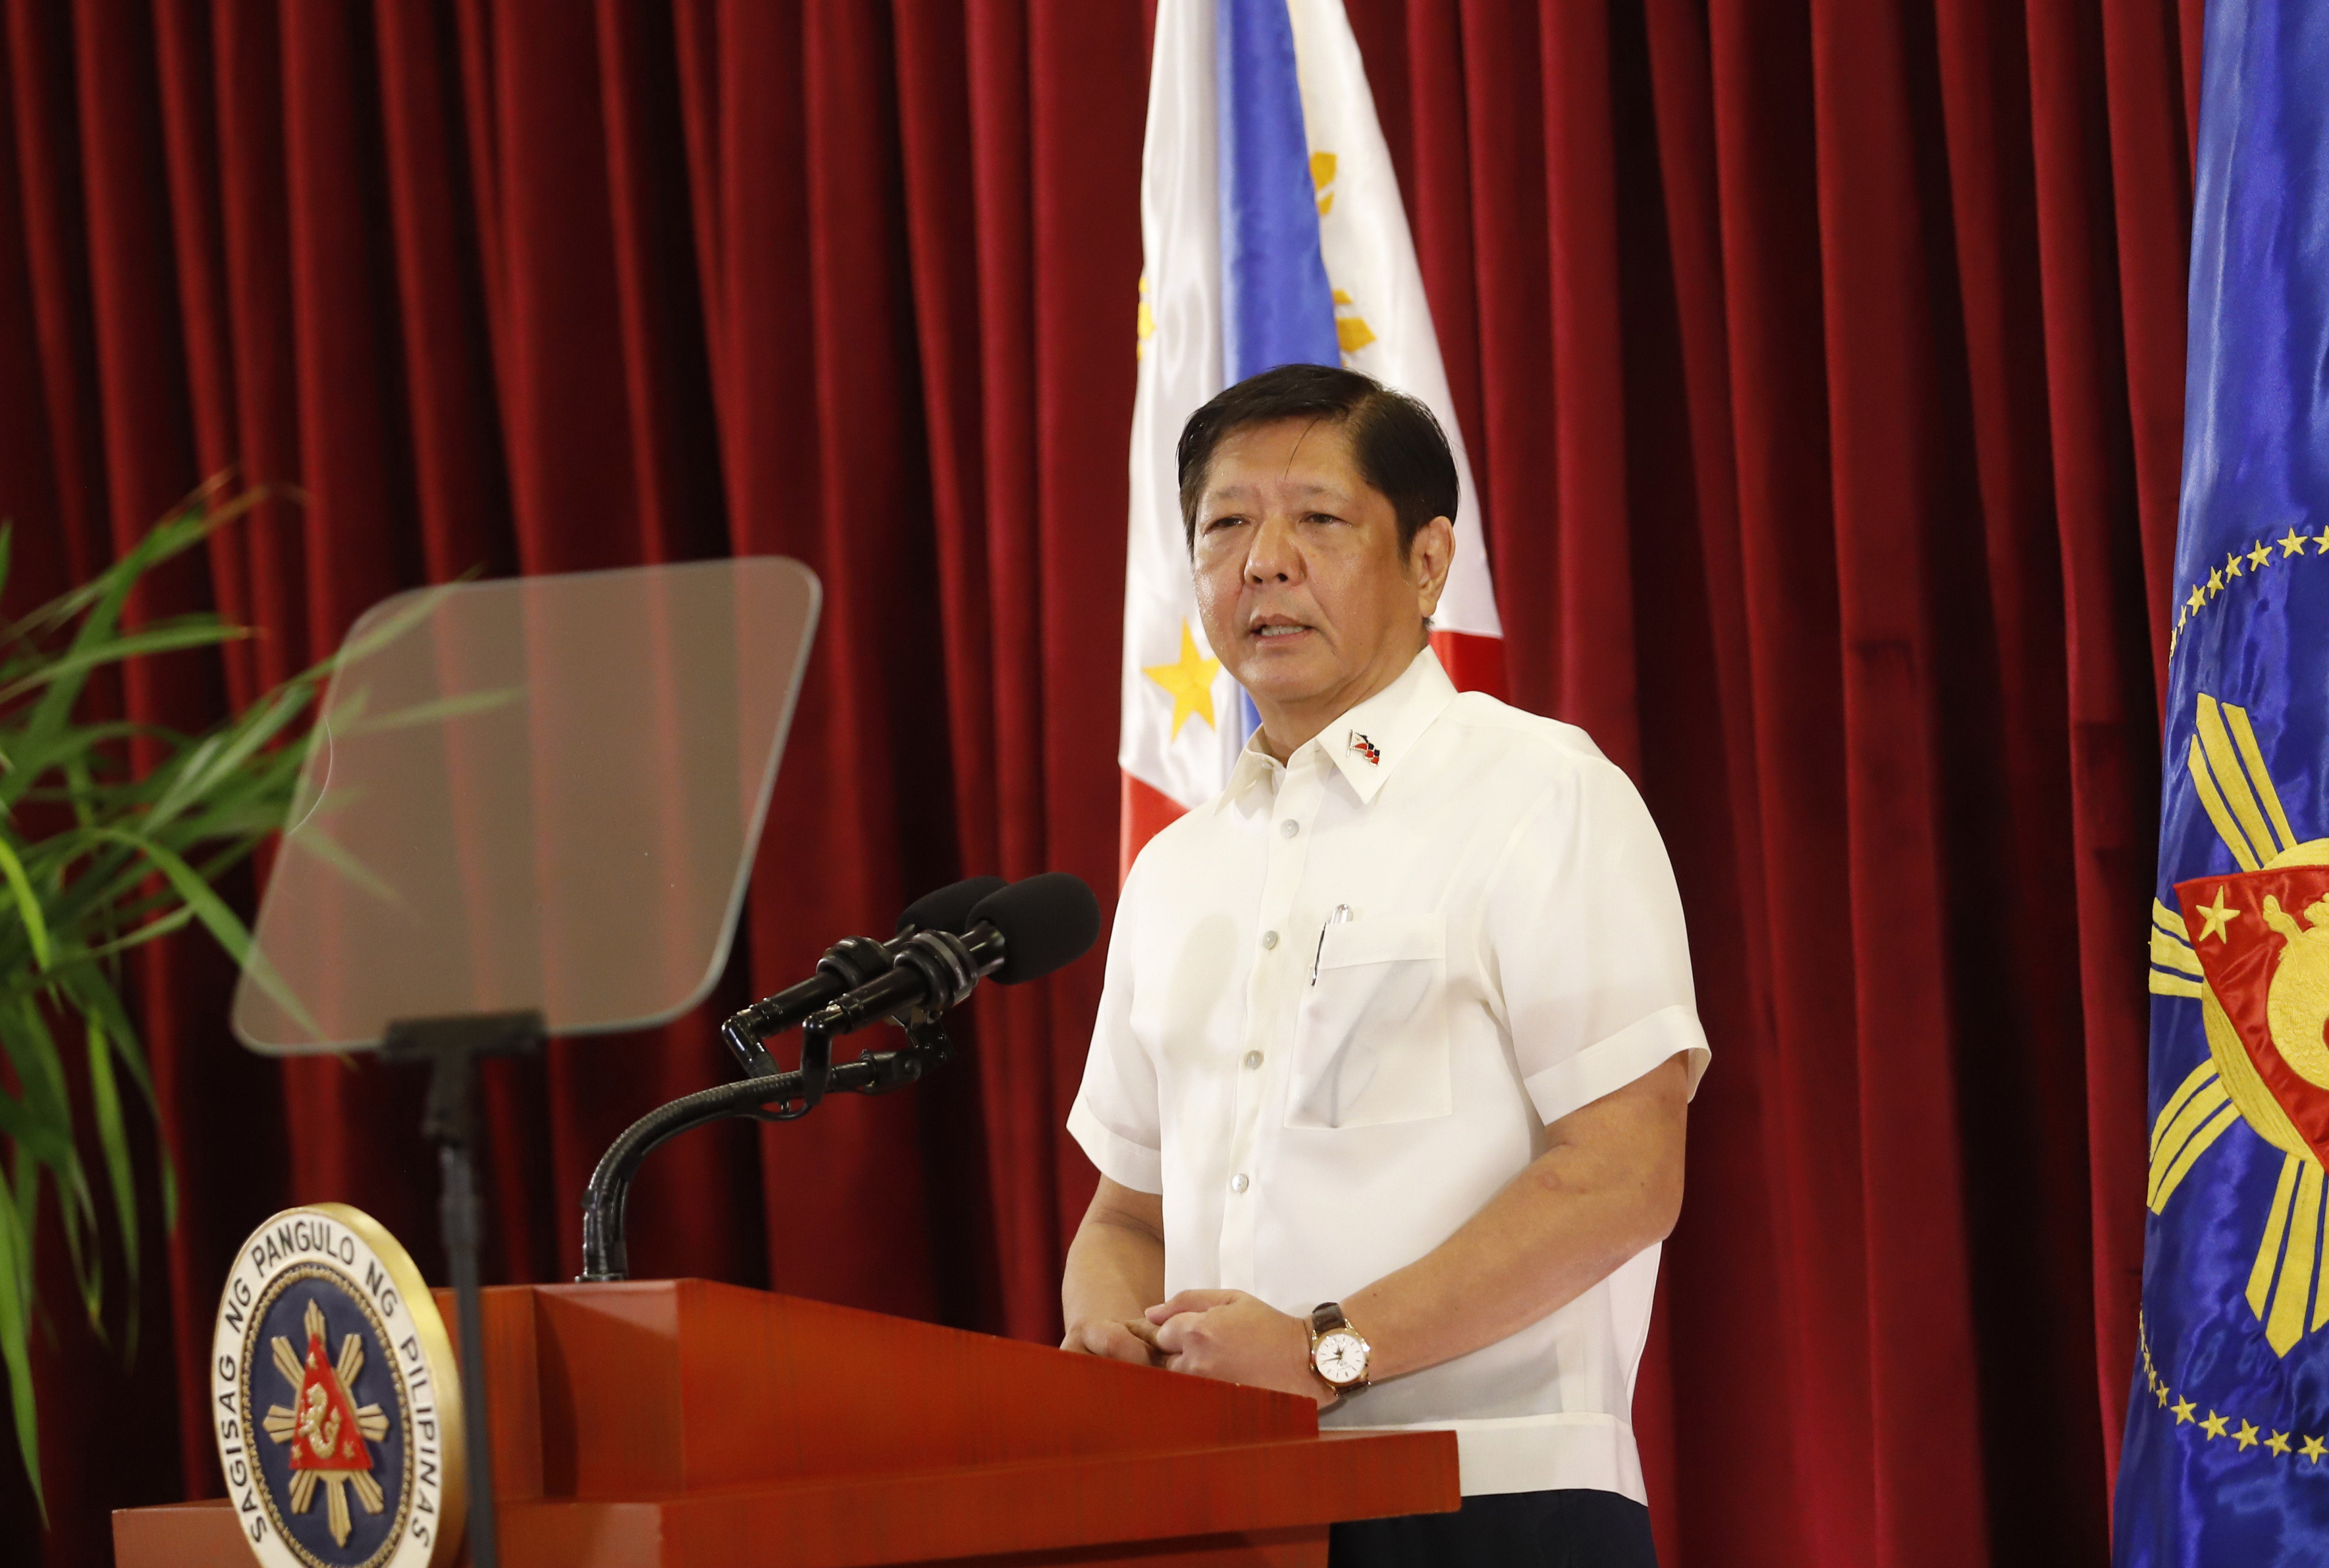 President Marcos returns to PH after successful participation in ASEAN Summit